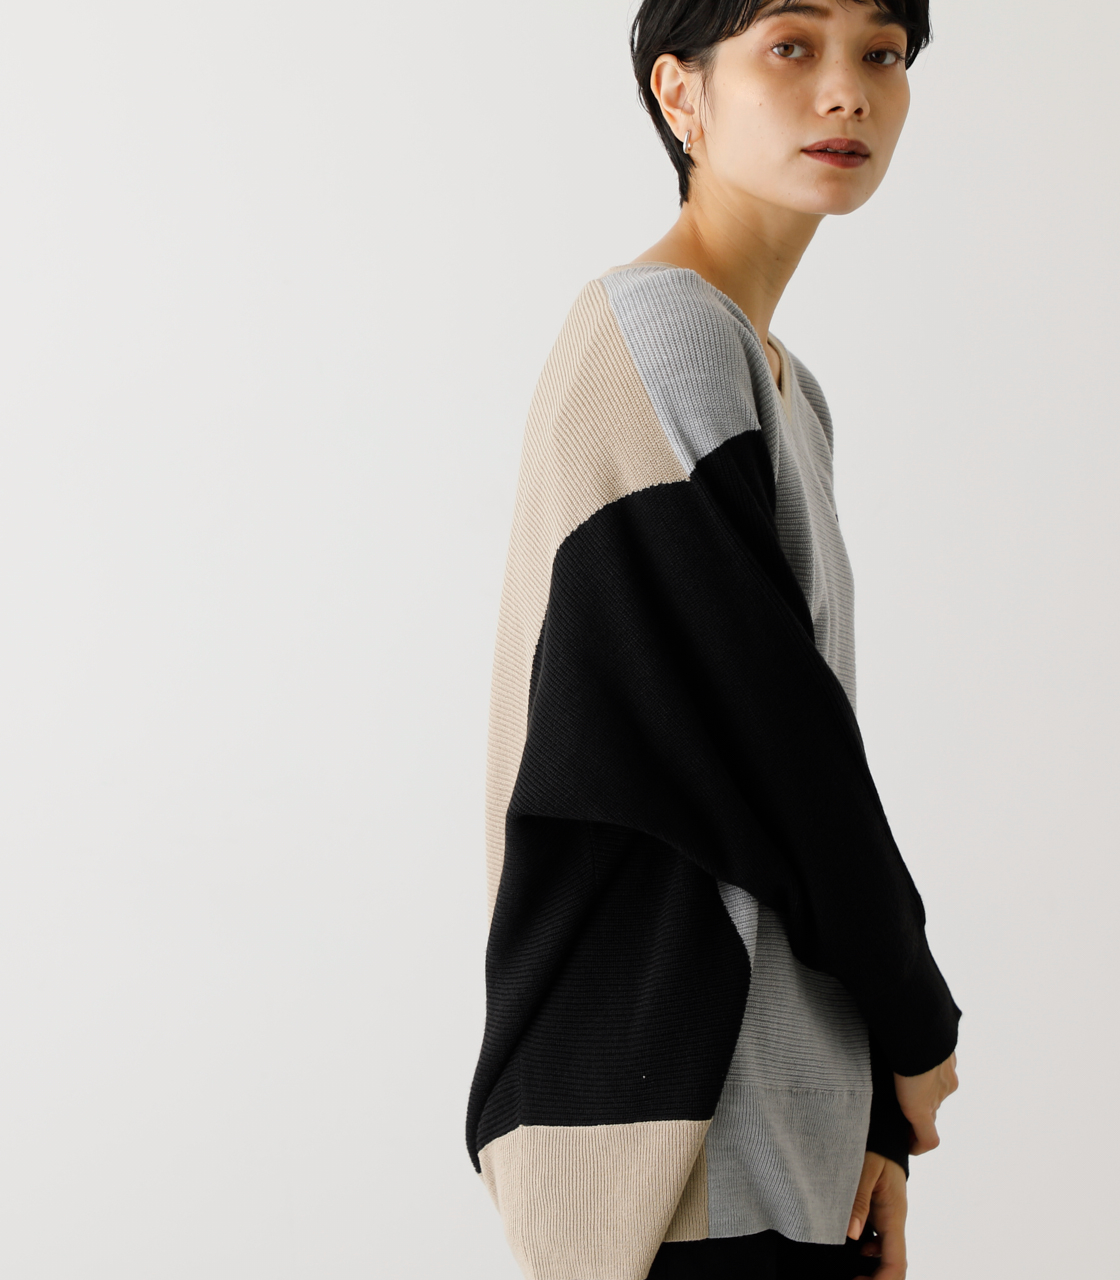 NUDIE DOLMAN KNIT TOPS/ヌーディードルマンニットトップス 詳細画像 柄GRY 2